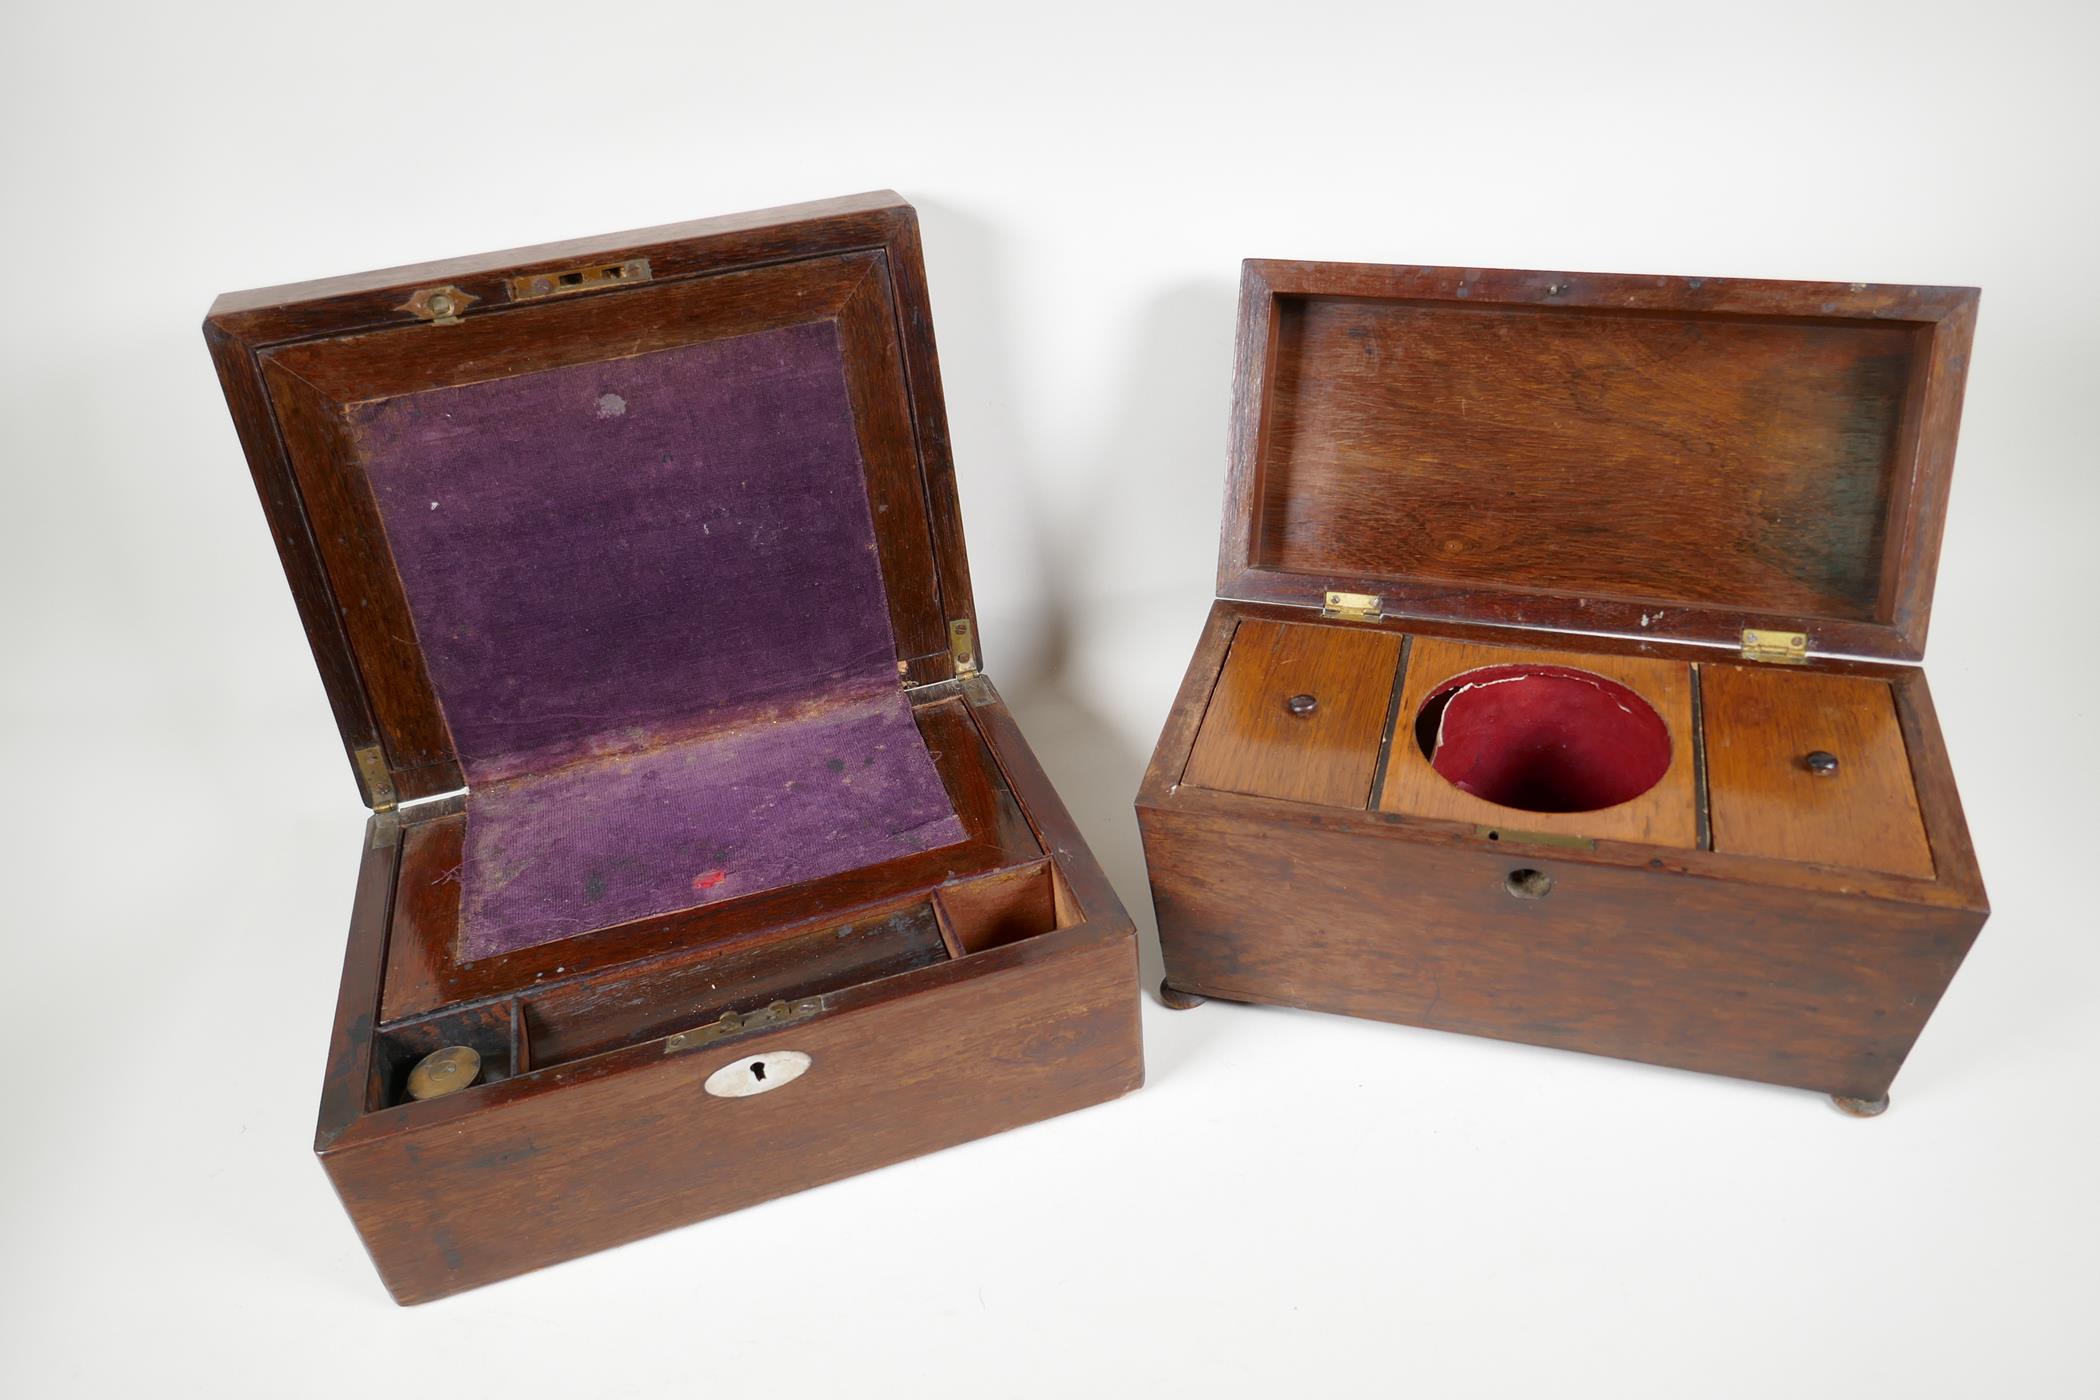 A C19th rosewood sarcophagus tea caddy, 12" x 6" x 7", and a rosewood writing box with mother of - Image 2 of 2